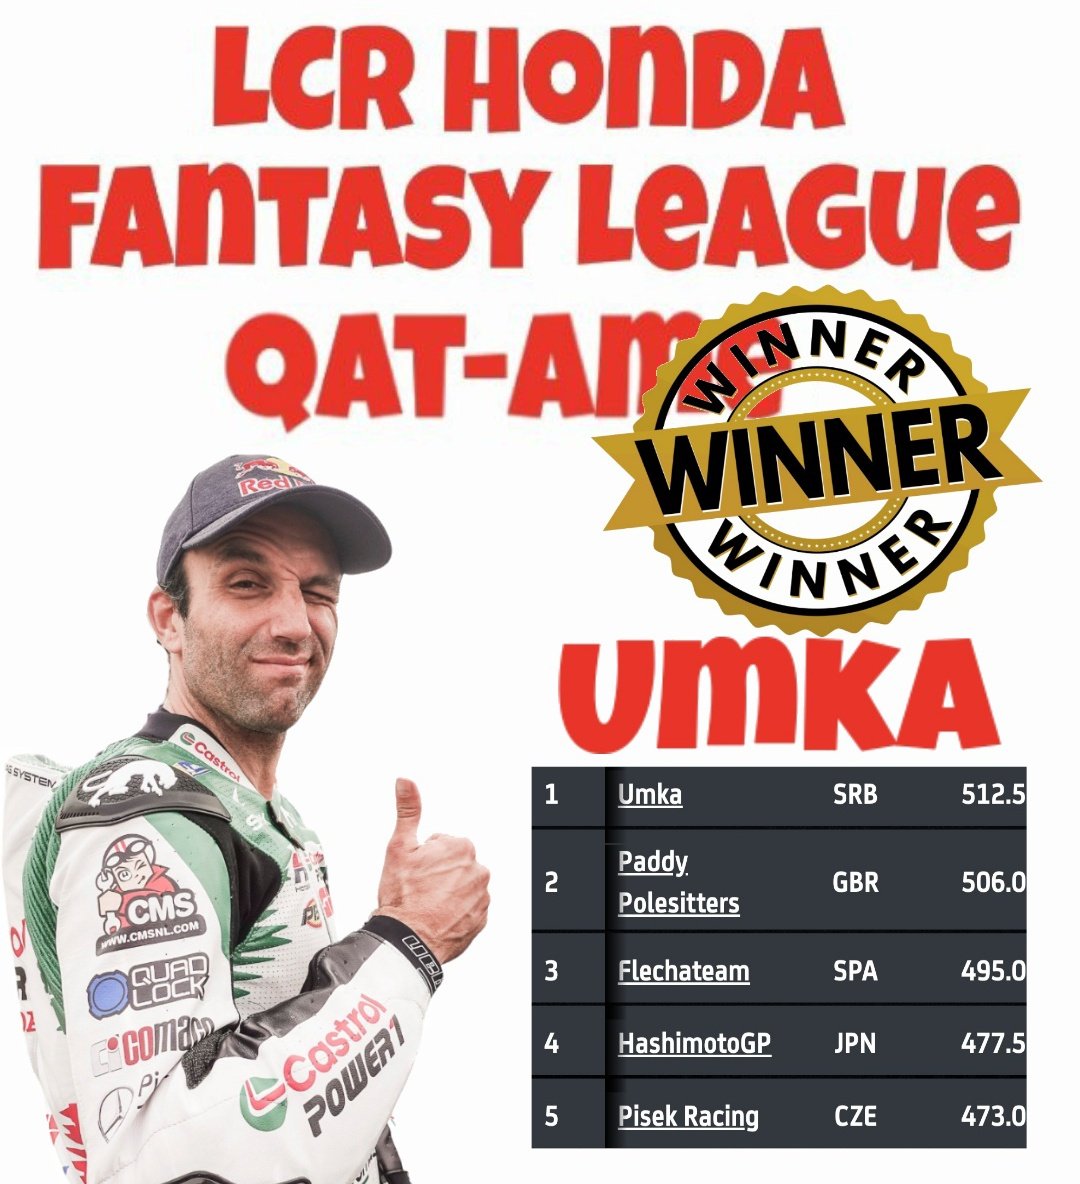 First @lcr_team Fantasy League Qatar-Americas finished Congratulations to the first winners 🥇Umka 🇷🇸 Signed Racing Wheel Taka&Zarco 🥈Paddy Polesitters 🇬🇧 Pair Taka Gloves 🥉Flechateam 🇪🇸 Signed Slider Join LCR Members Facebook group and stay tuned to next league